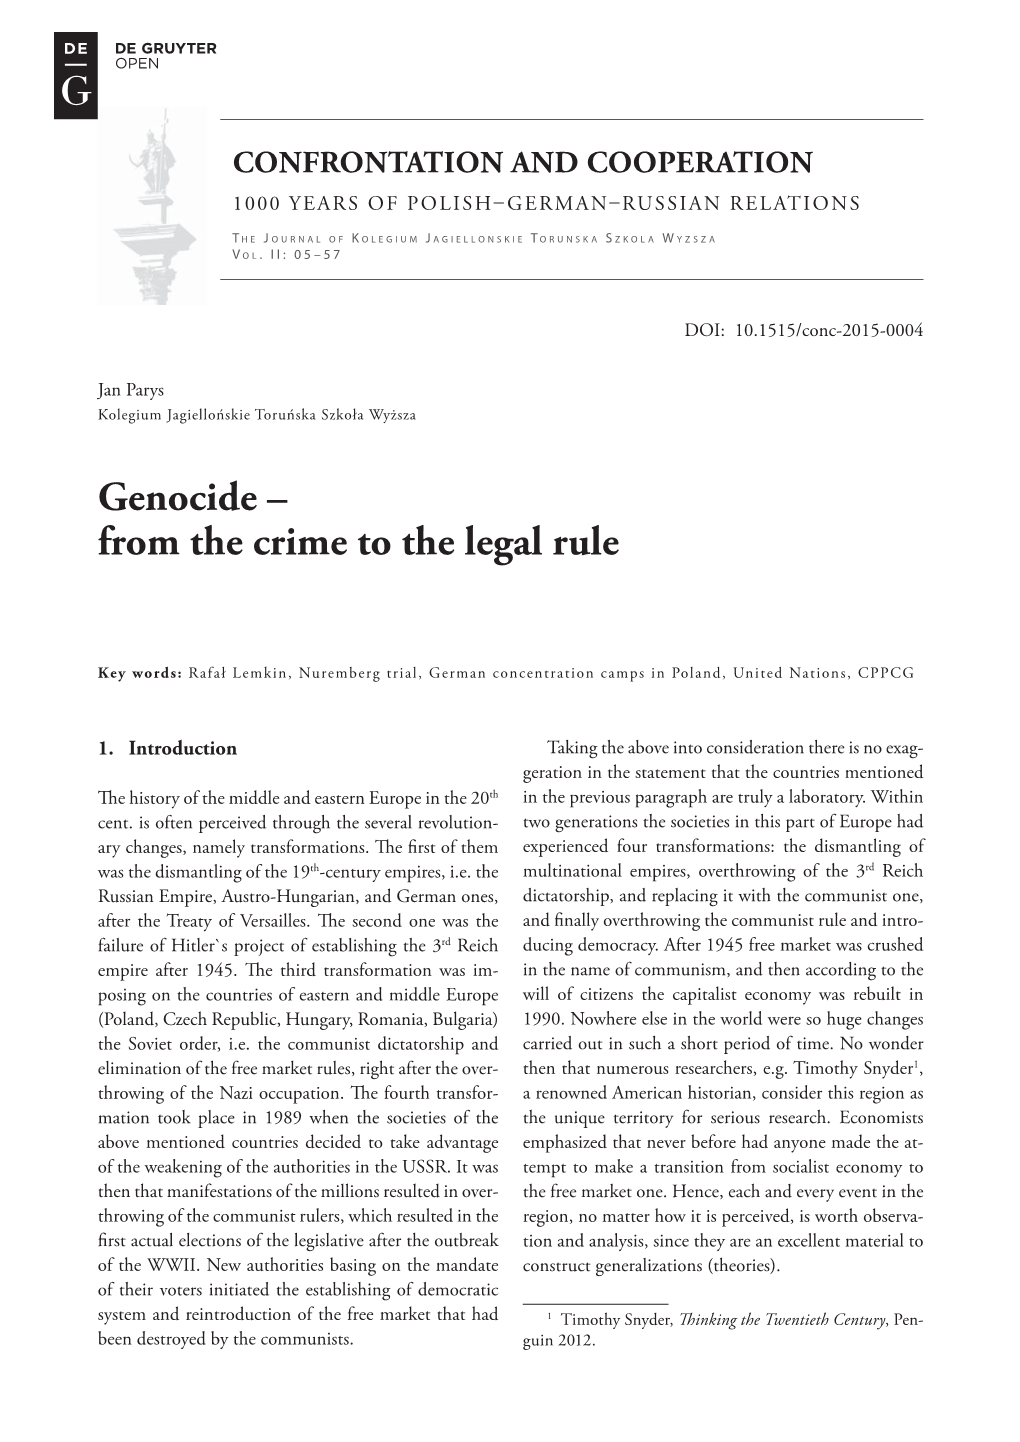 Genocide – from the Crime to the Legal Rule